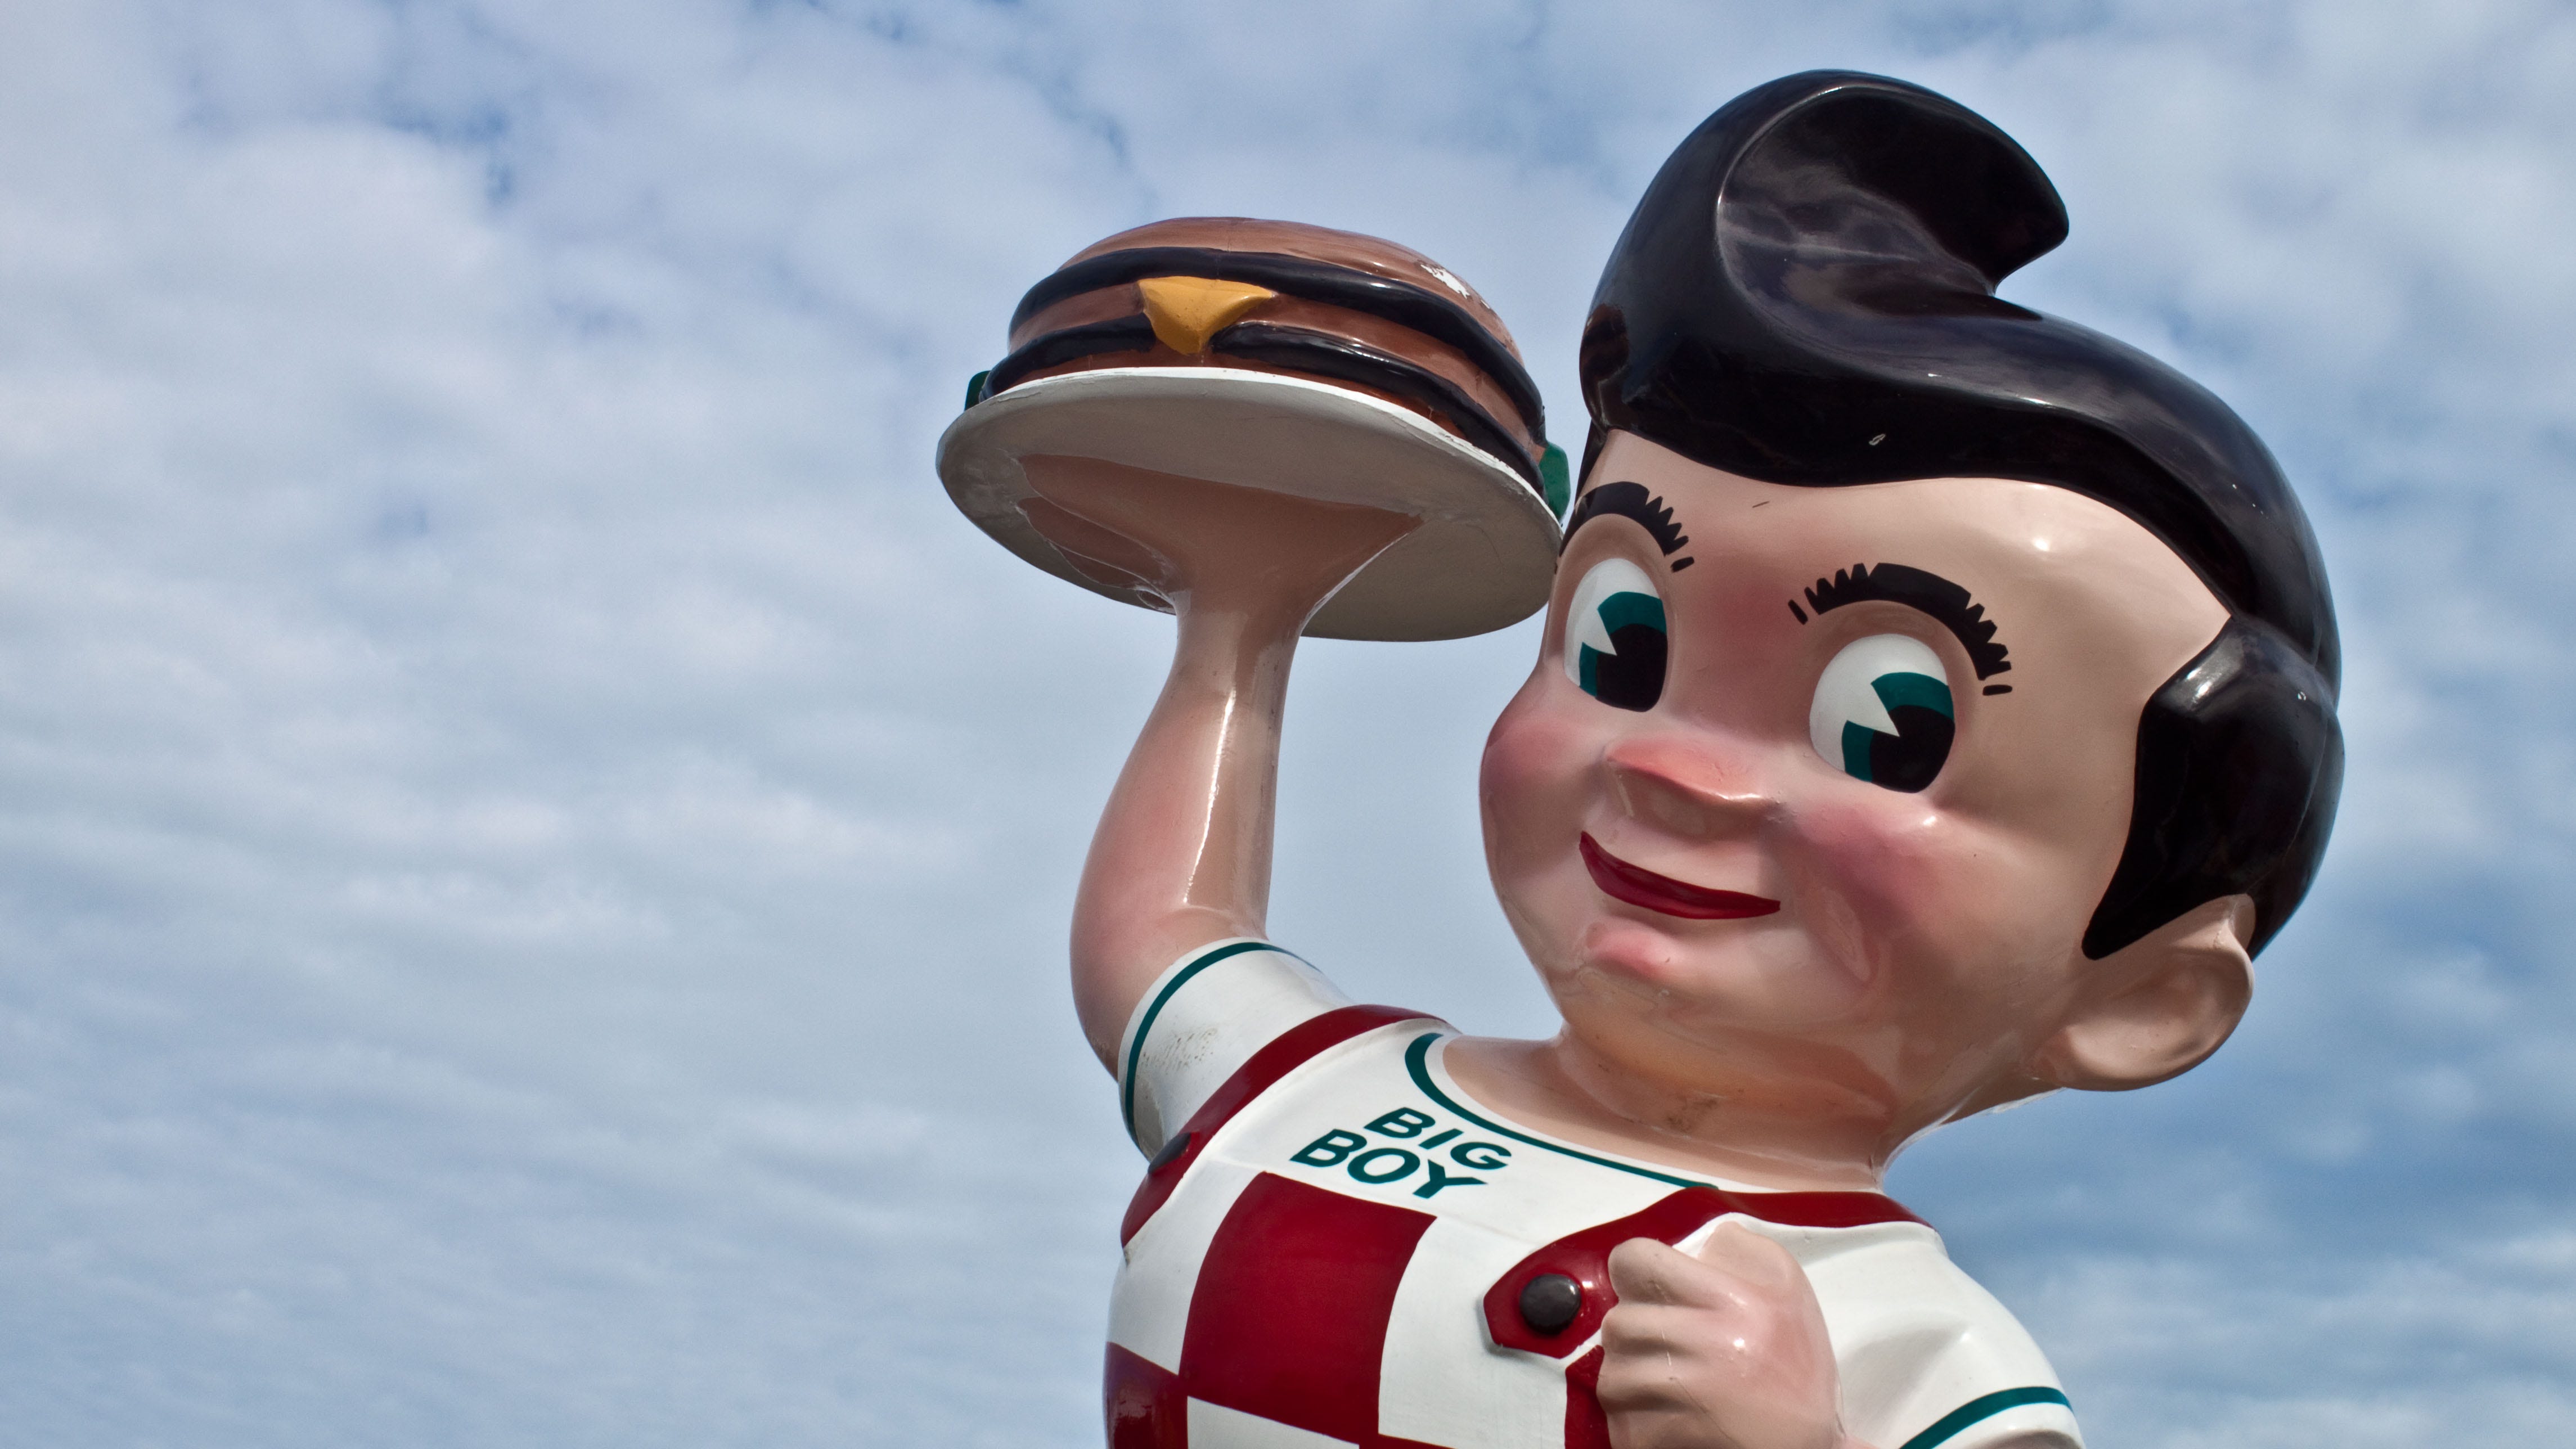 Big Boy restaurants replace iconic mascot with obscure character named  Dolly | Fox News